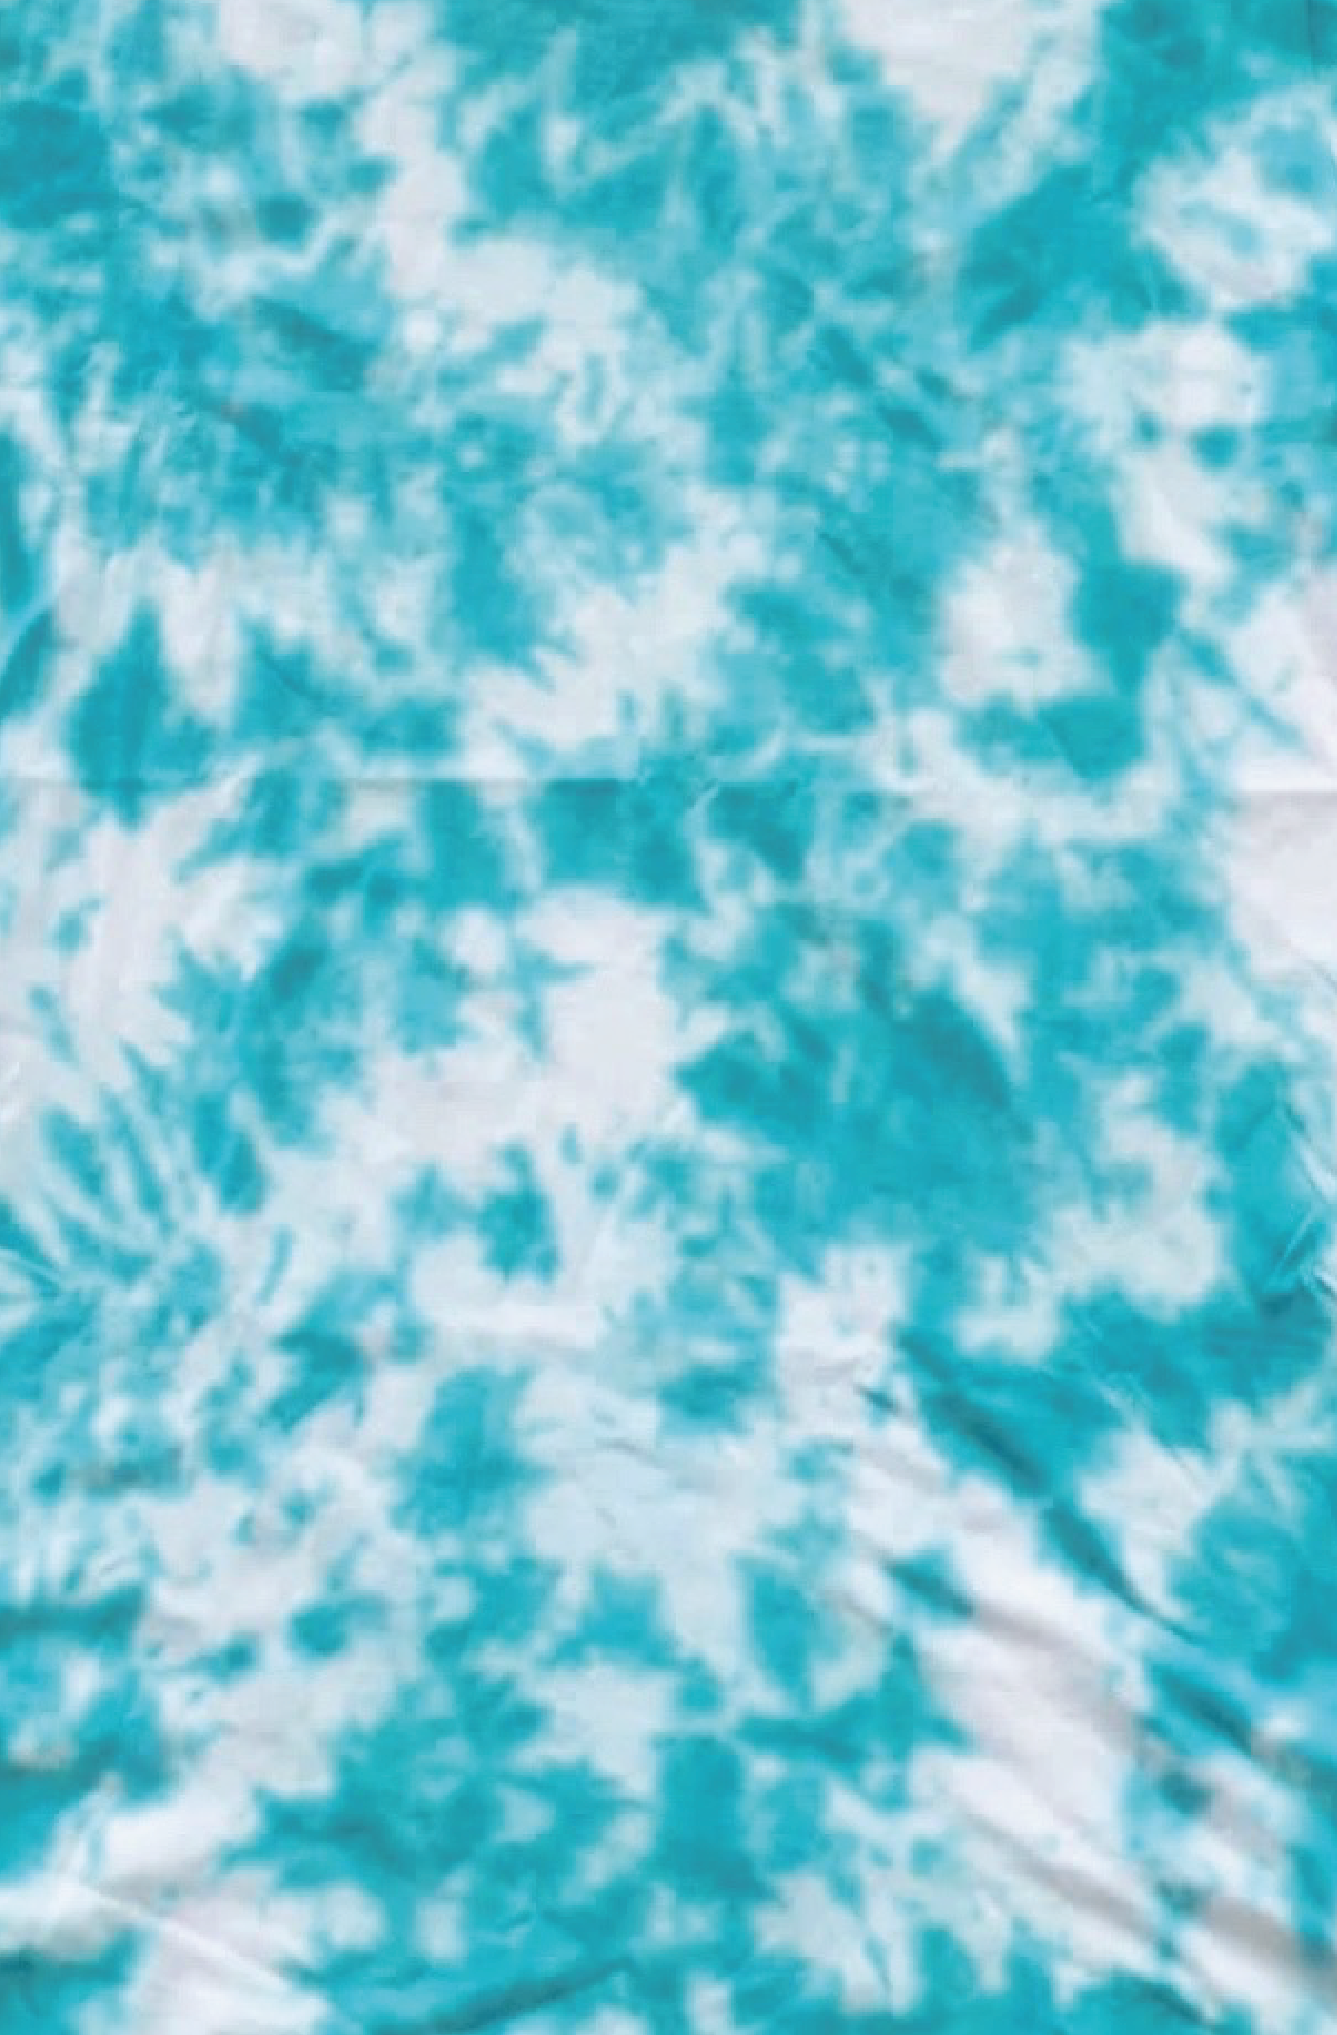 Tie-dye shirt in blue and white 